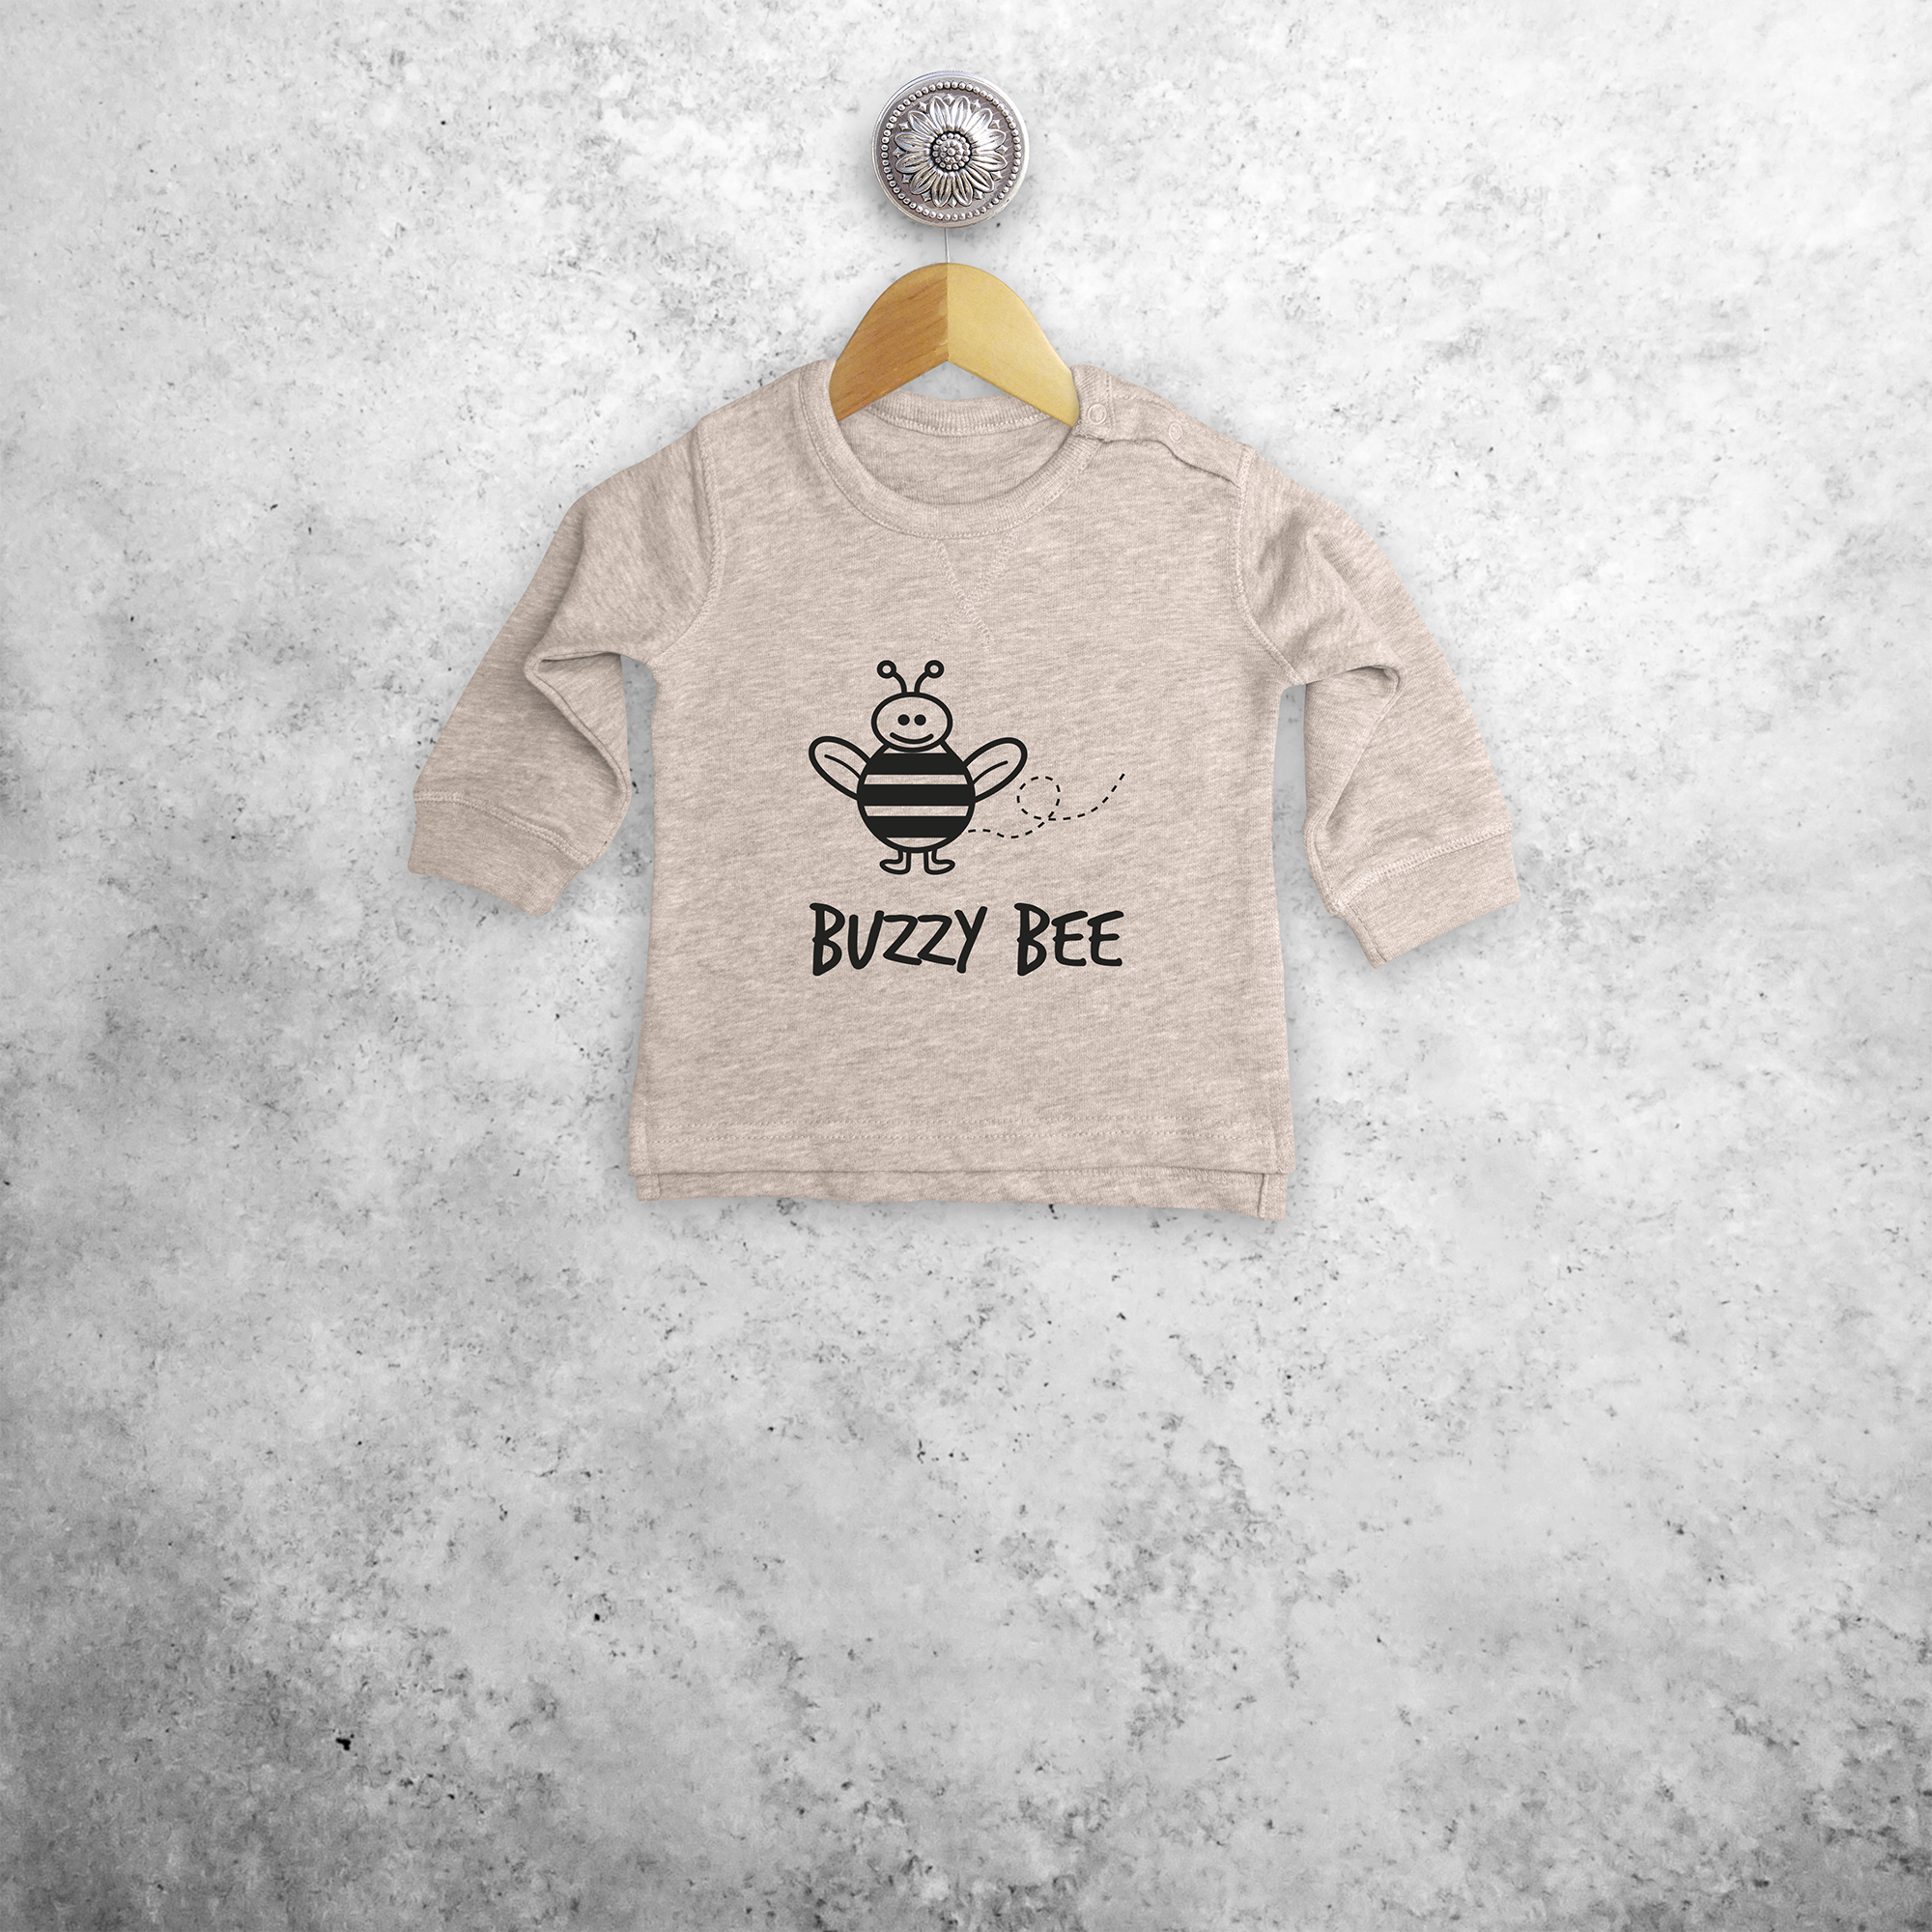 'Buzzy bee' baby sweater